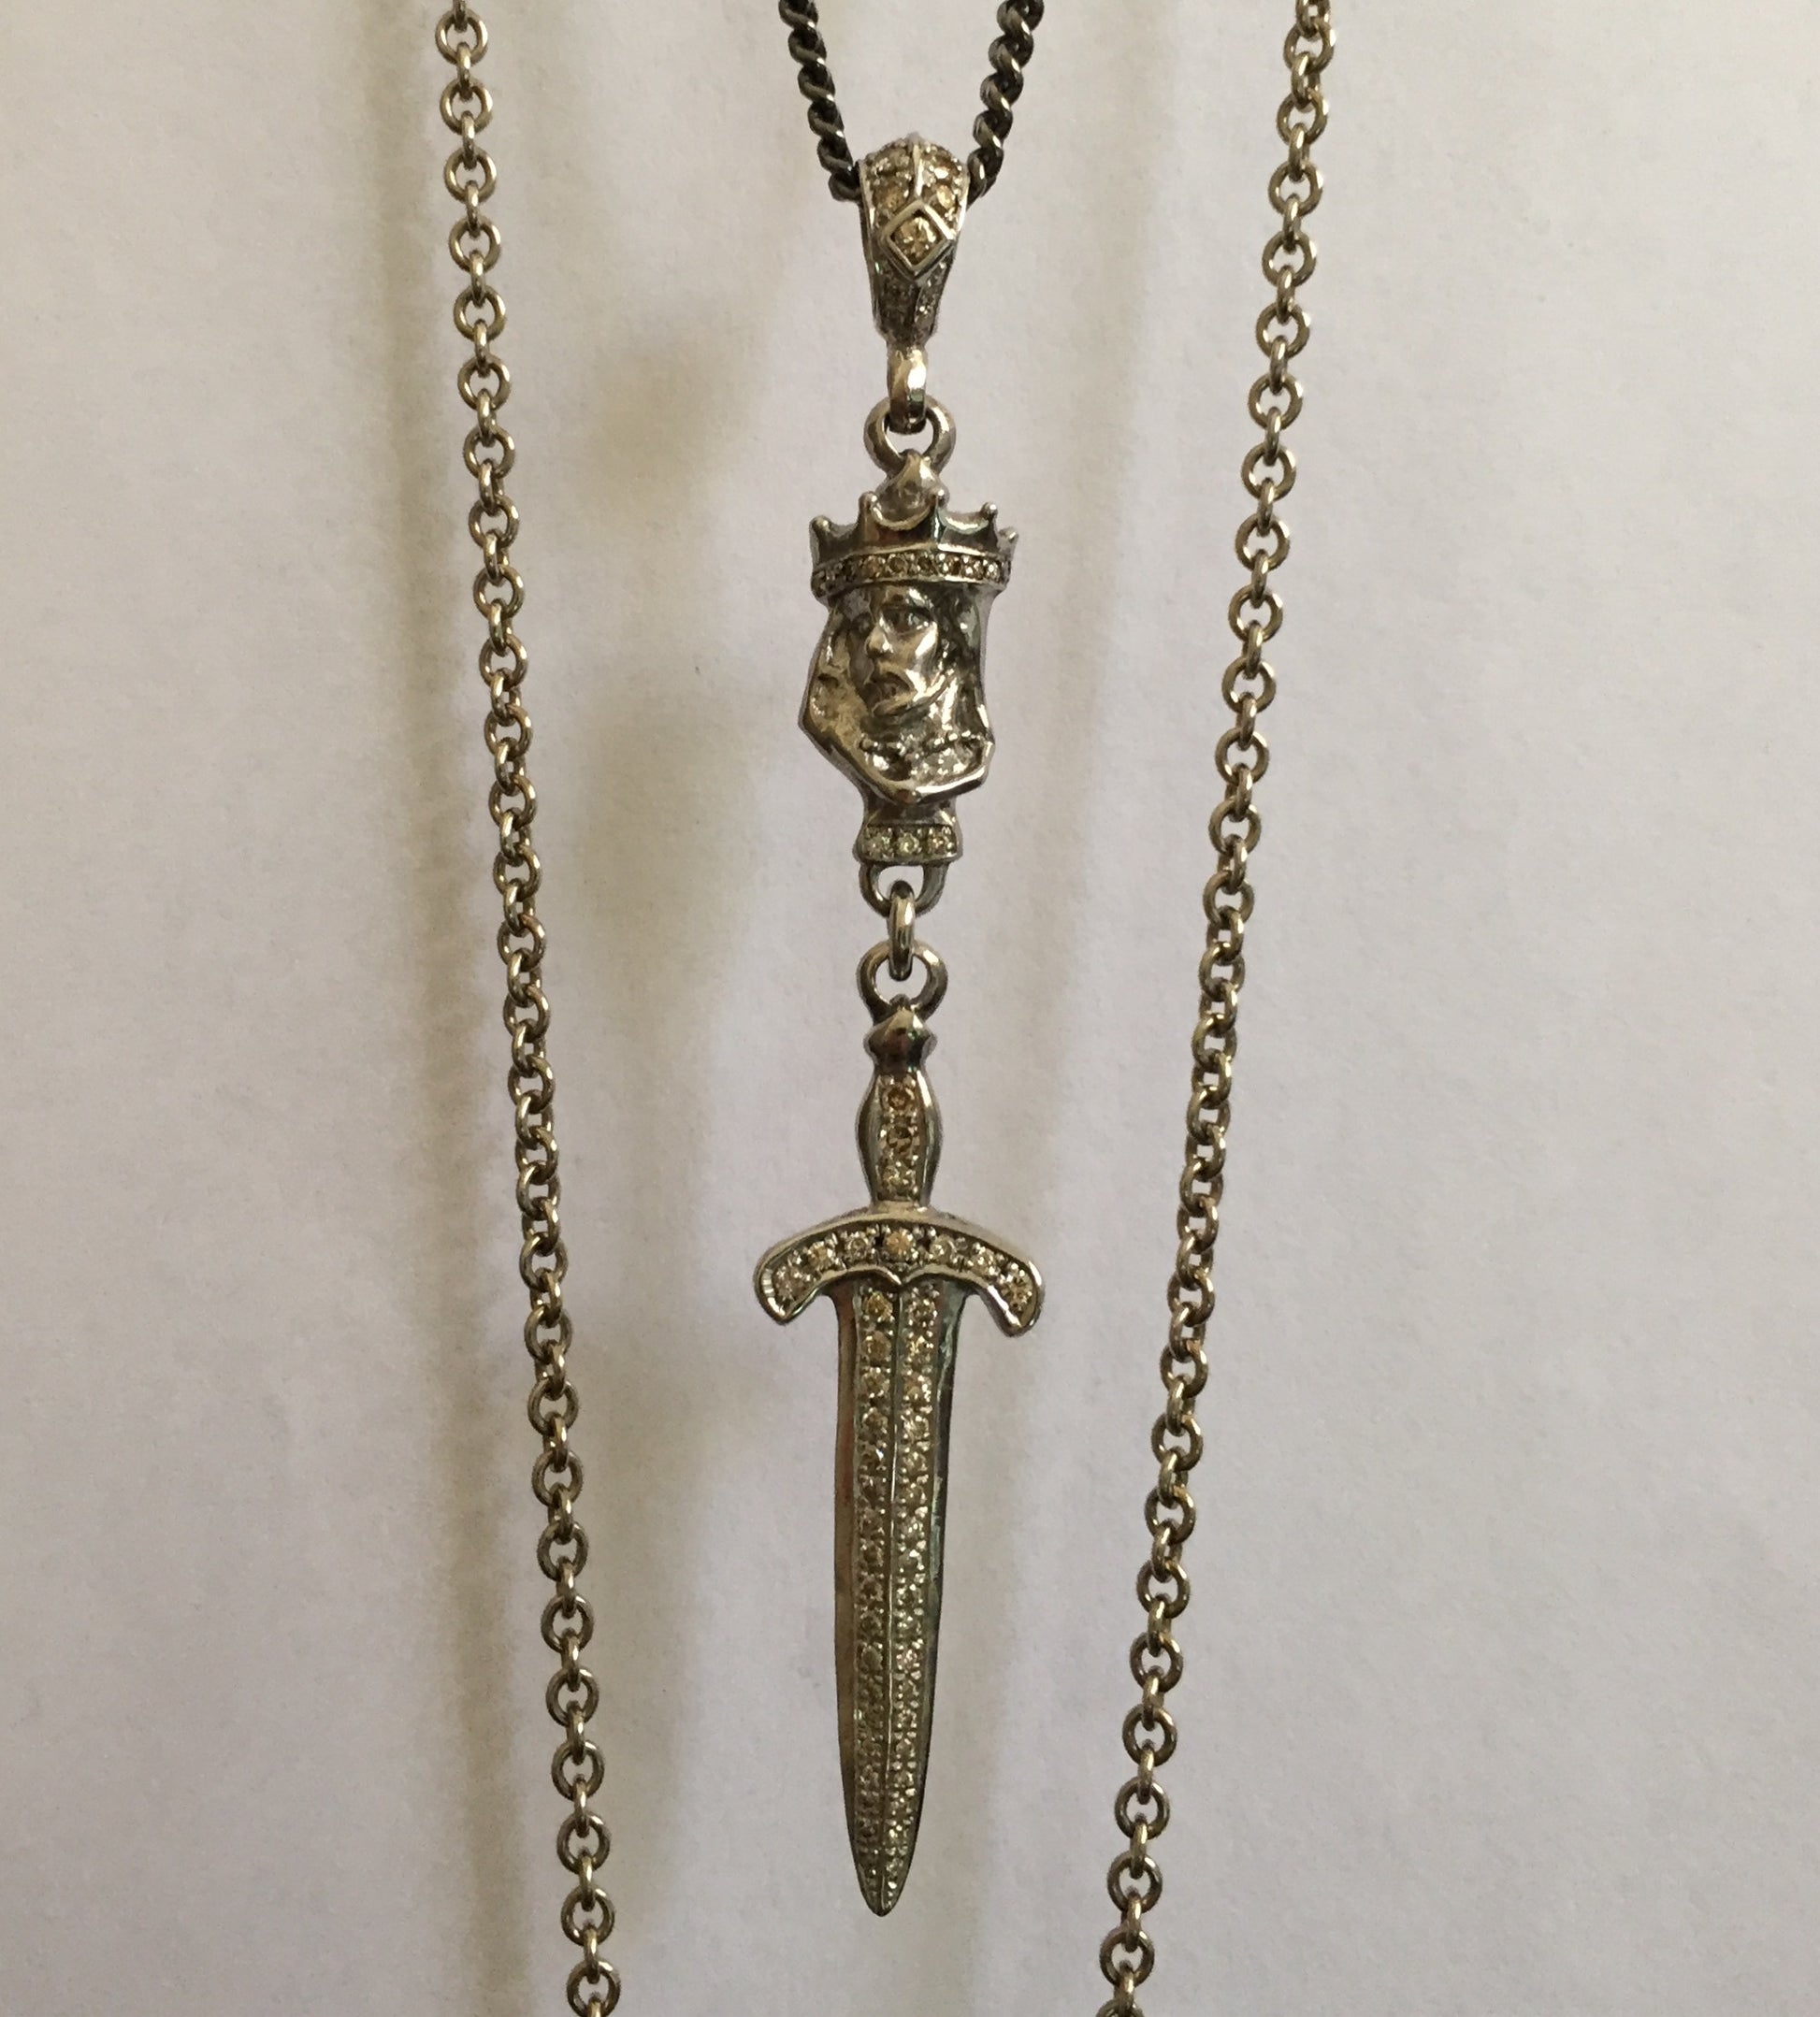 Necklace - King with Sword by Roman Paul